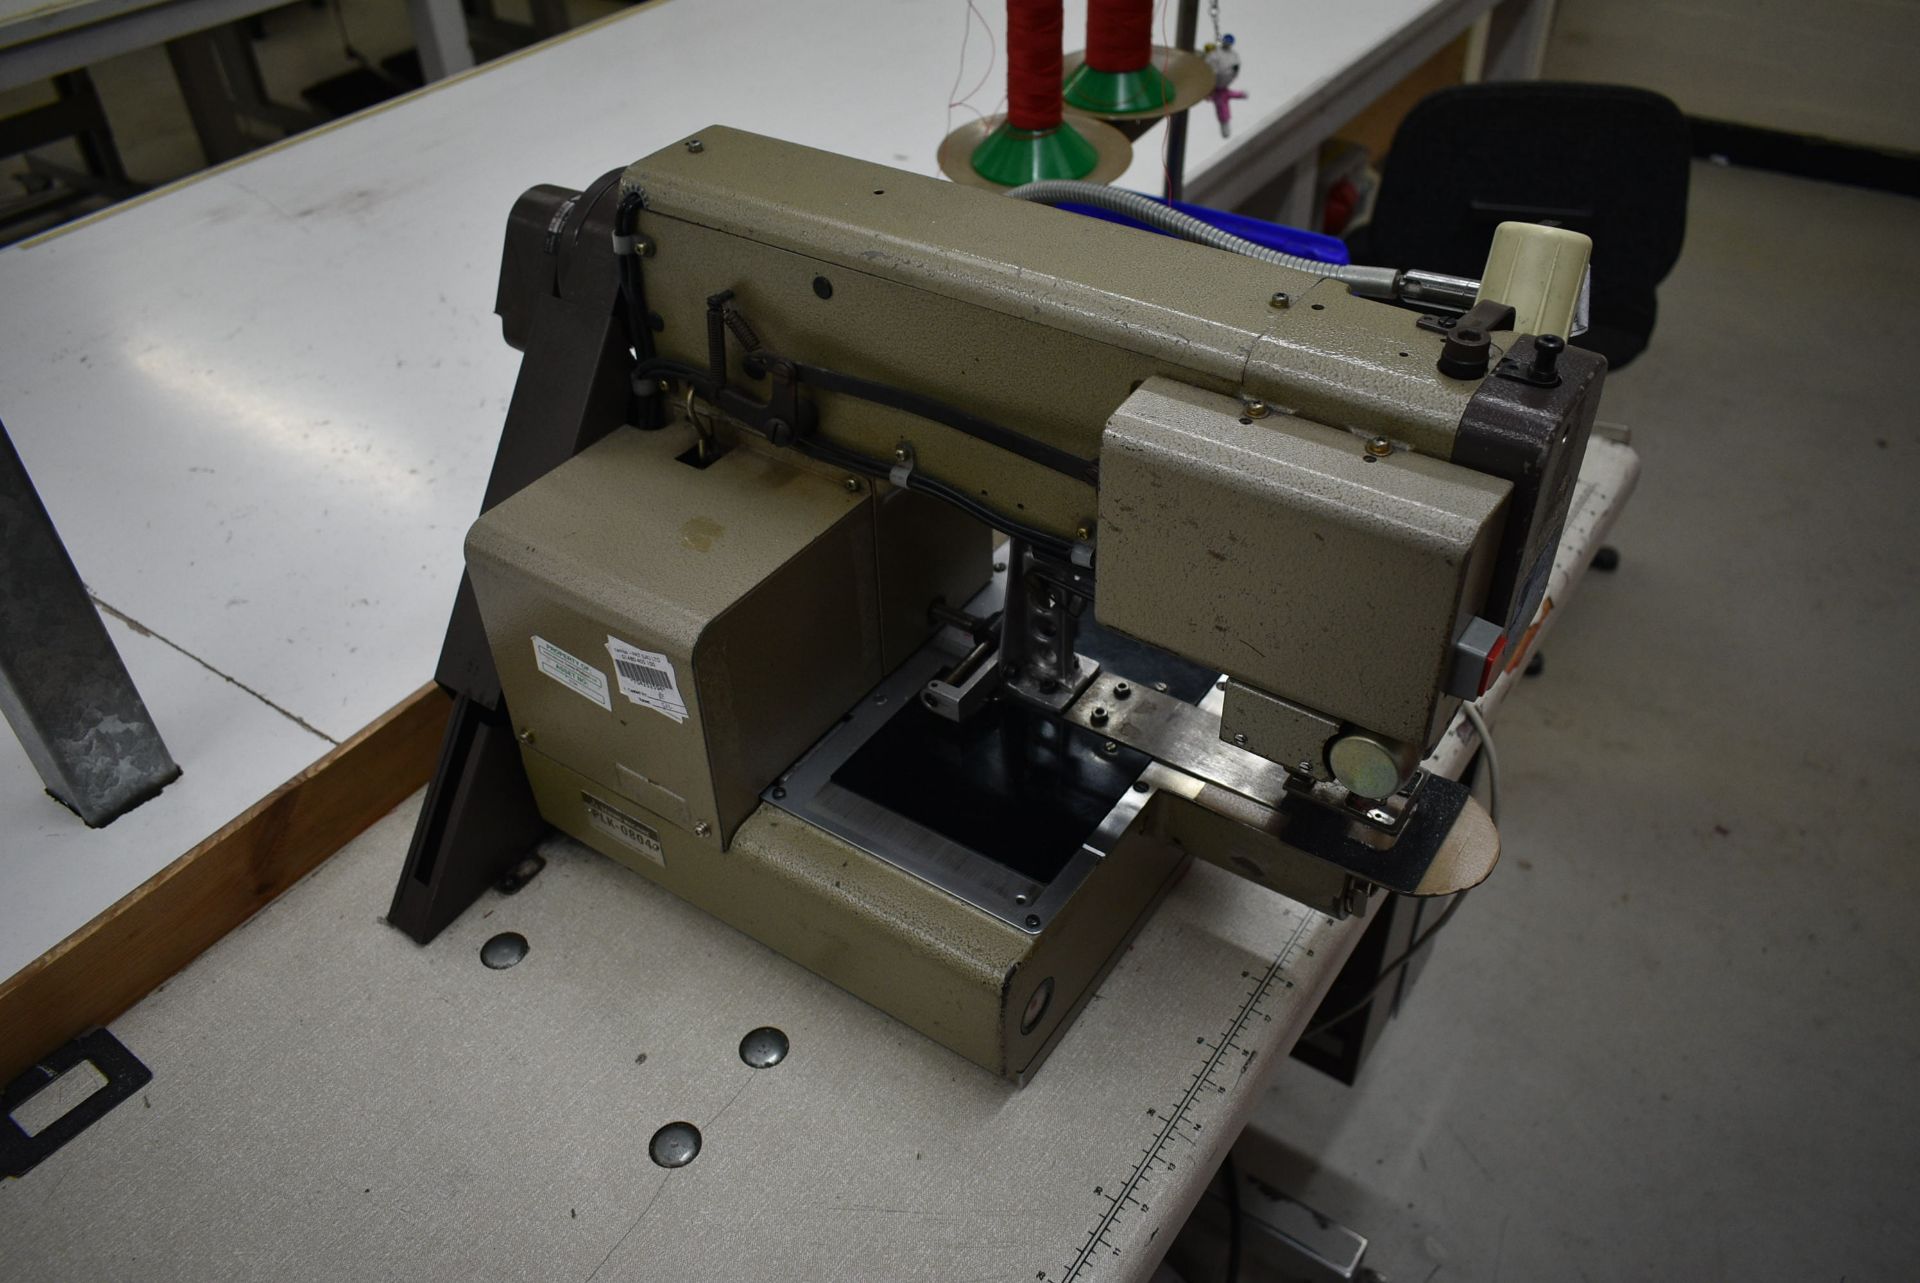 Mitsubishi PLK-08049 PROGRAMMABLE SEWING MACHINE, serial no. 781119, with Limi-Stop Z electric motor - Image 3 of 7